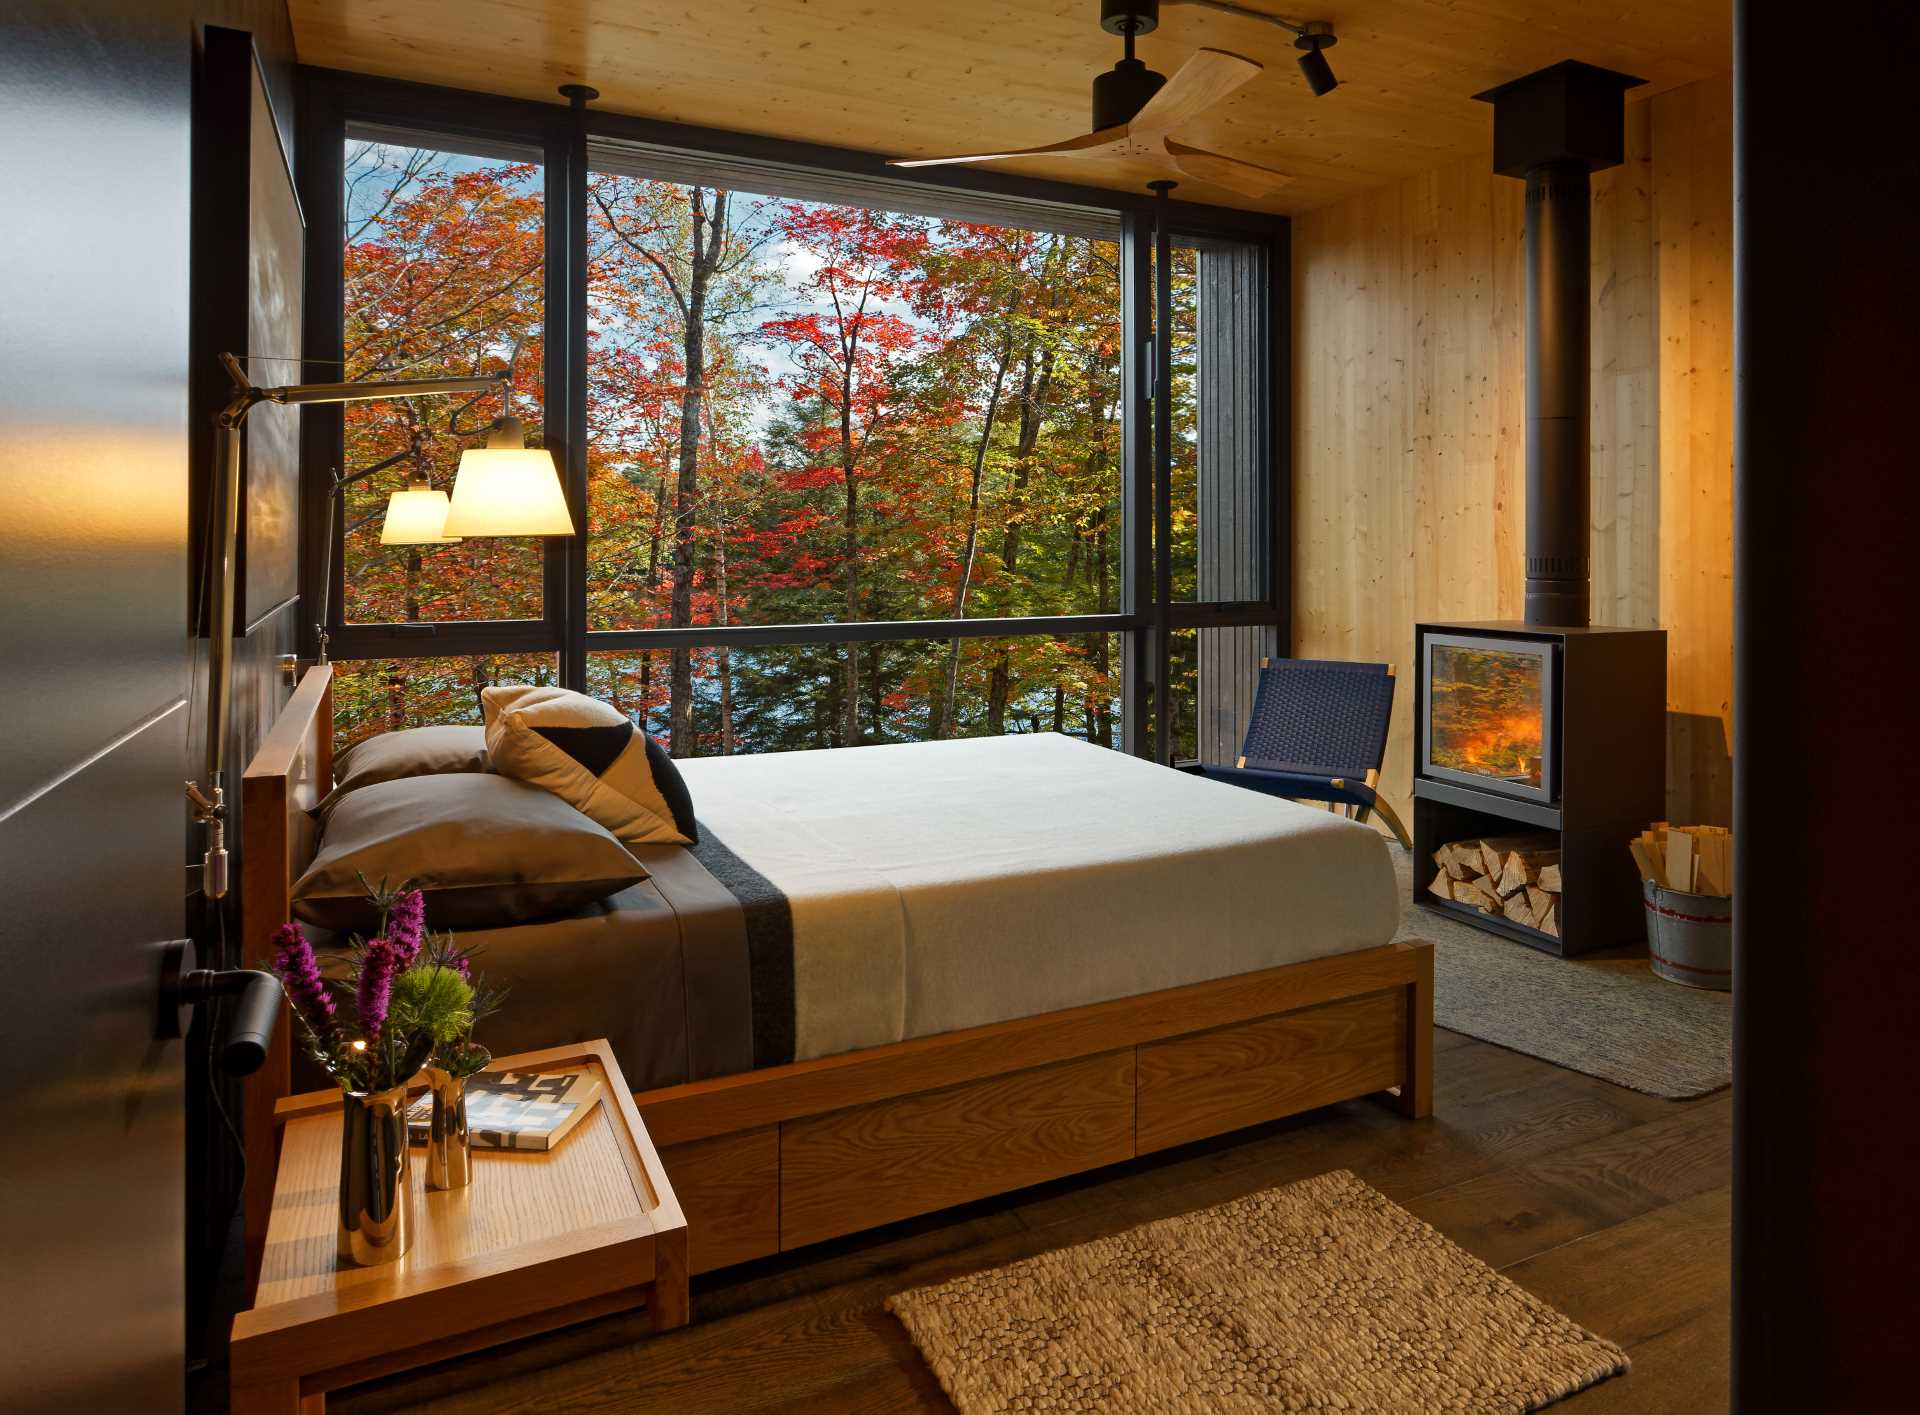 A modern bedroom with a fireplace.